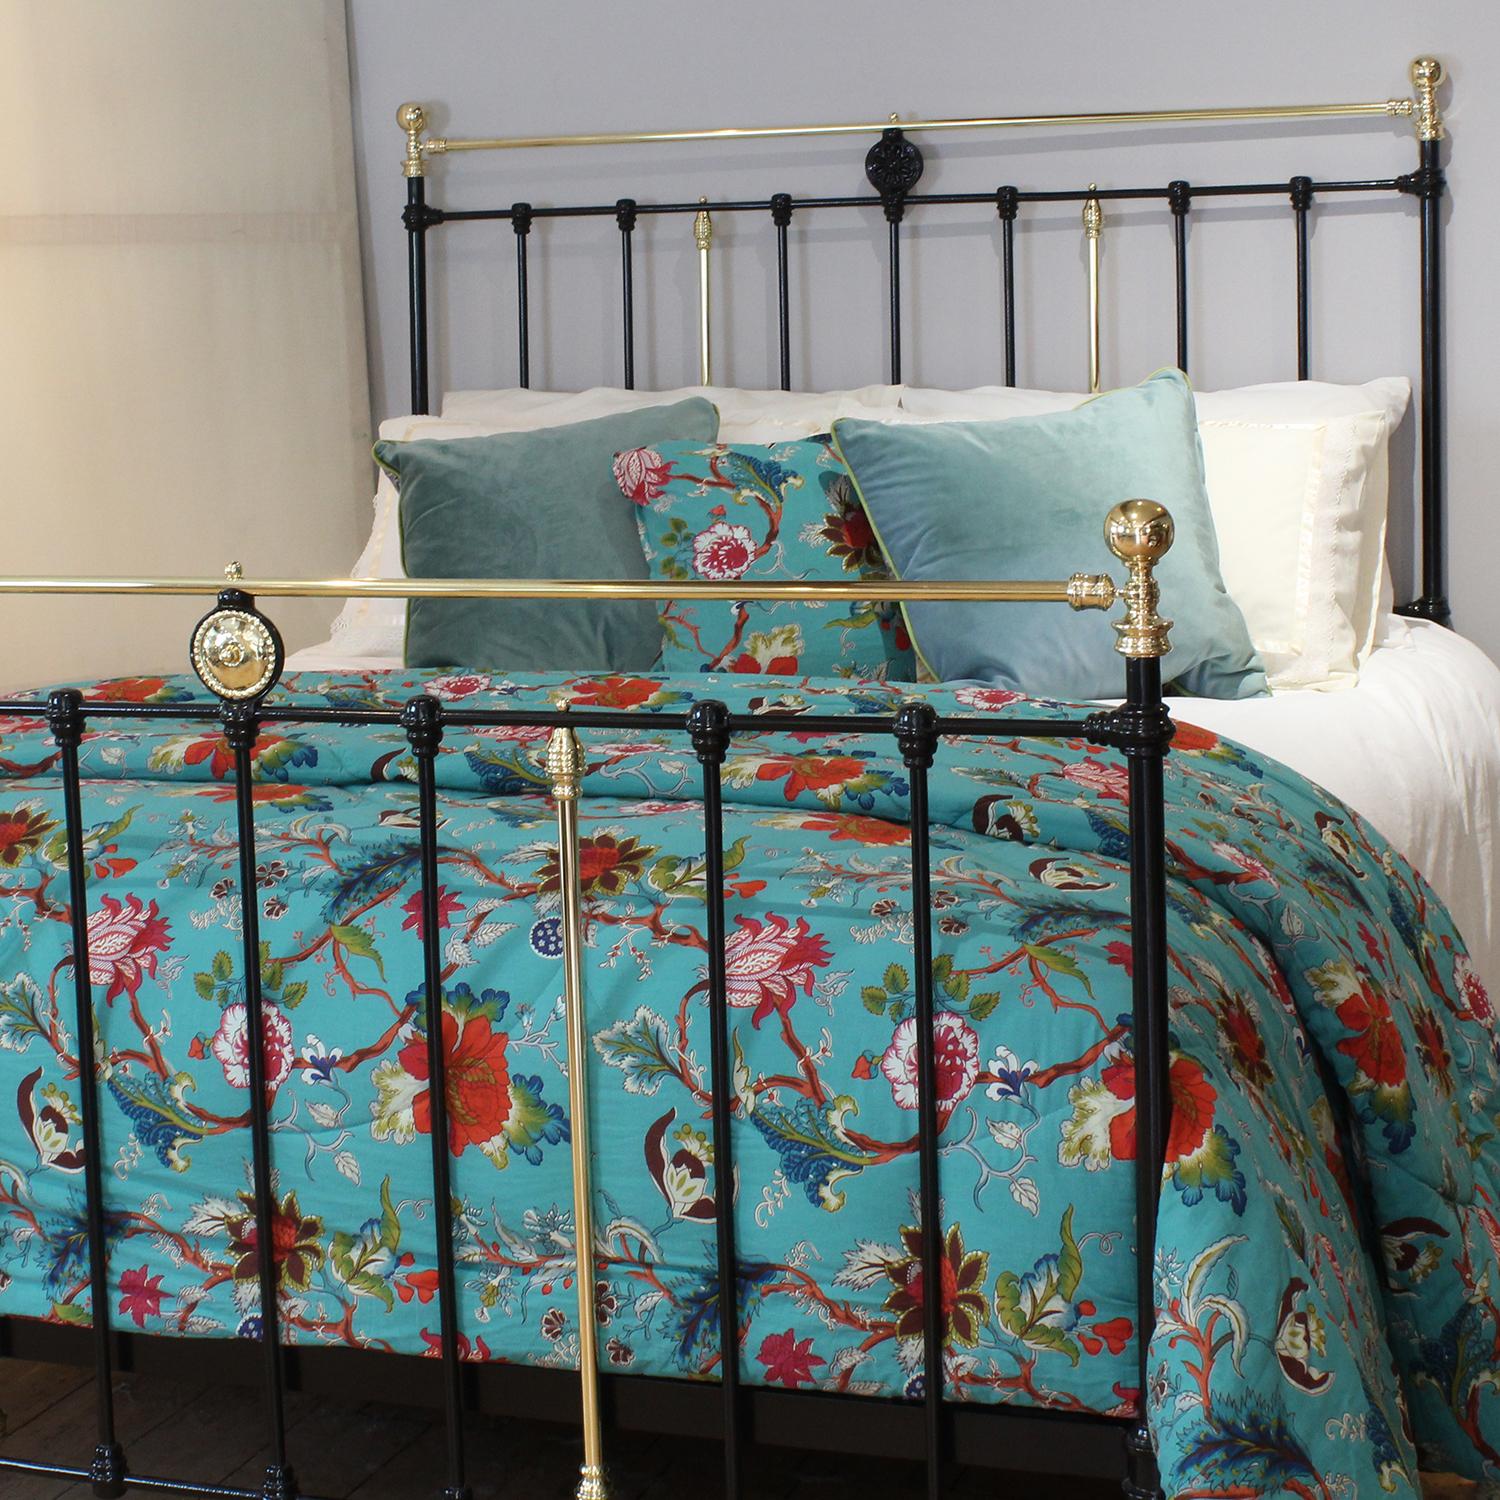 A fabulous brass and iron antique bed with central brass rosette in the foot panel and straight brass top rails. Circa 1895.

The price also includes a firm bed base to support the mattress.

The mattress, bedding and linen are extra and can be